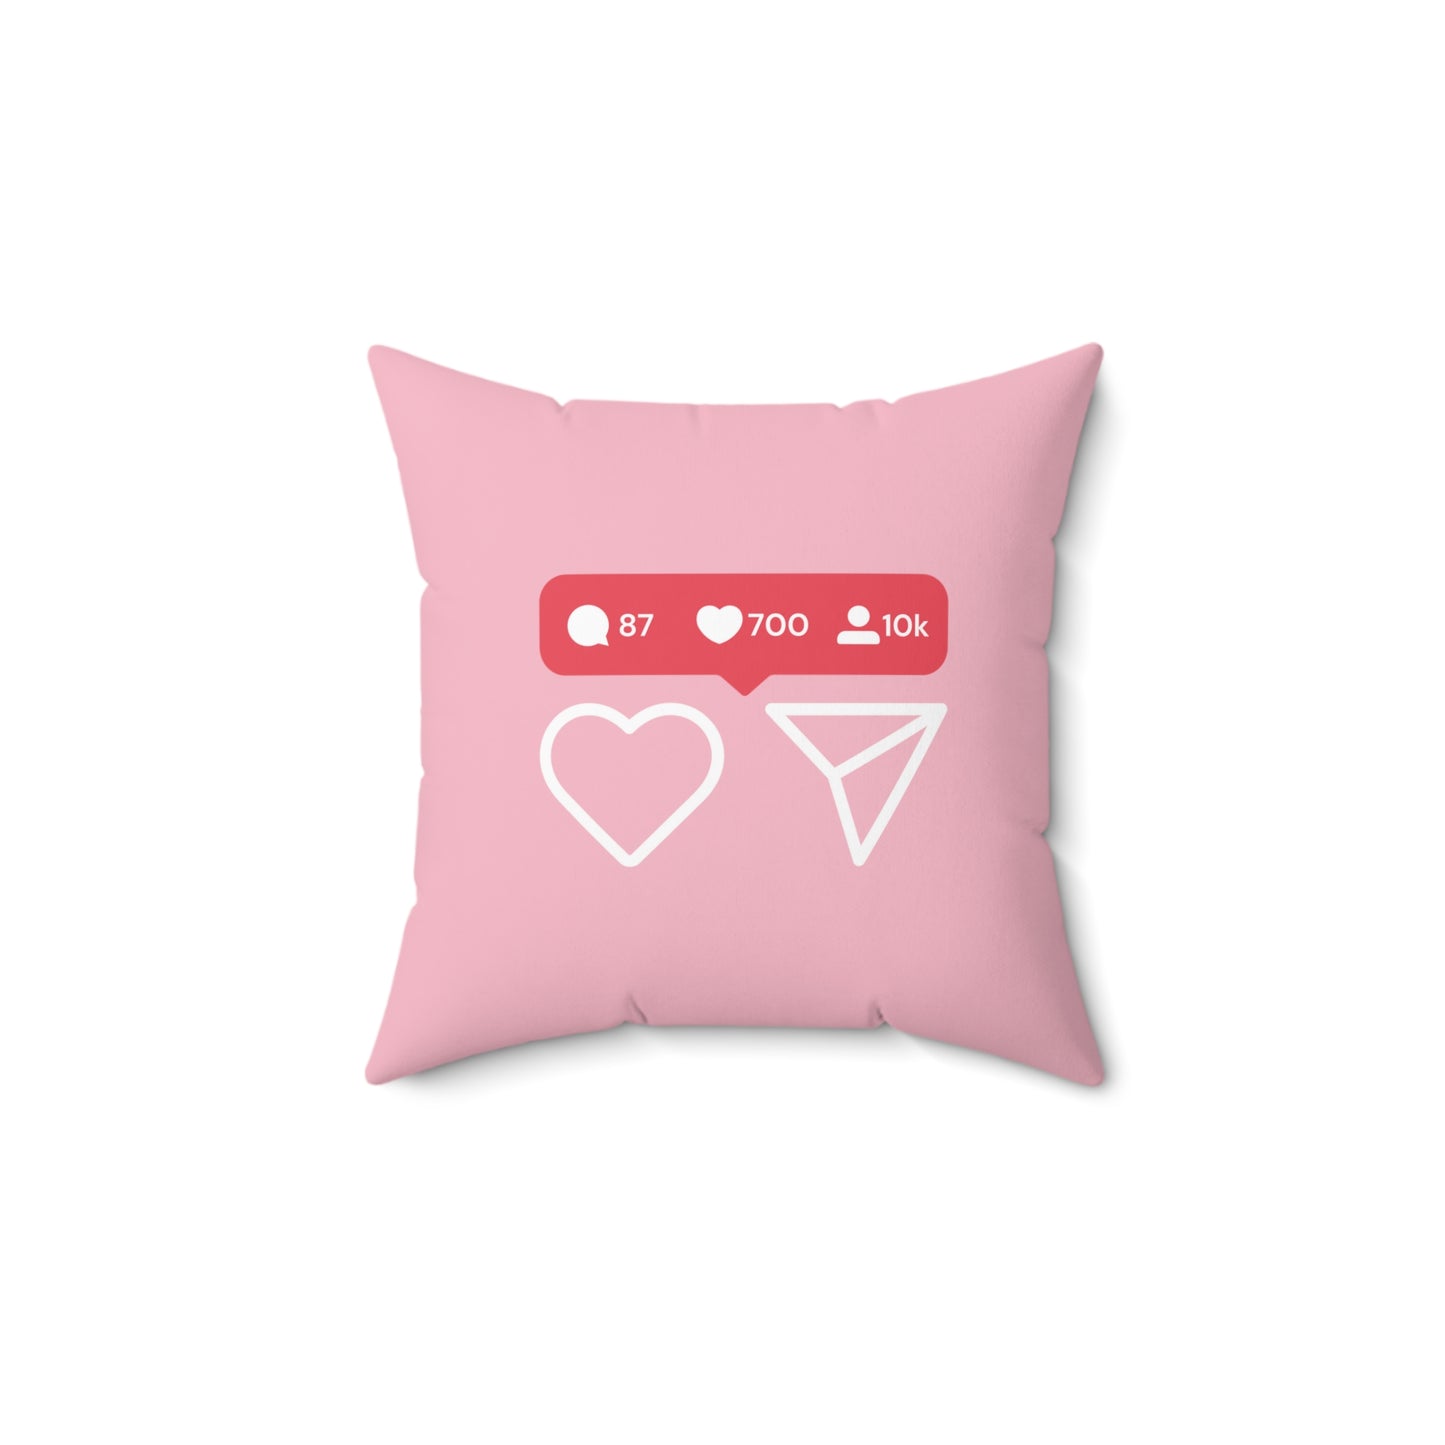 Influencer Engagement Square Pillow - Pink